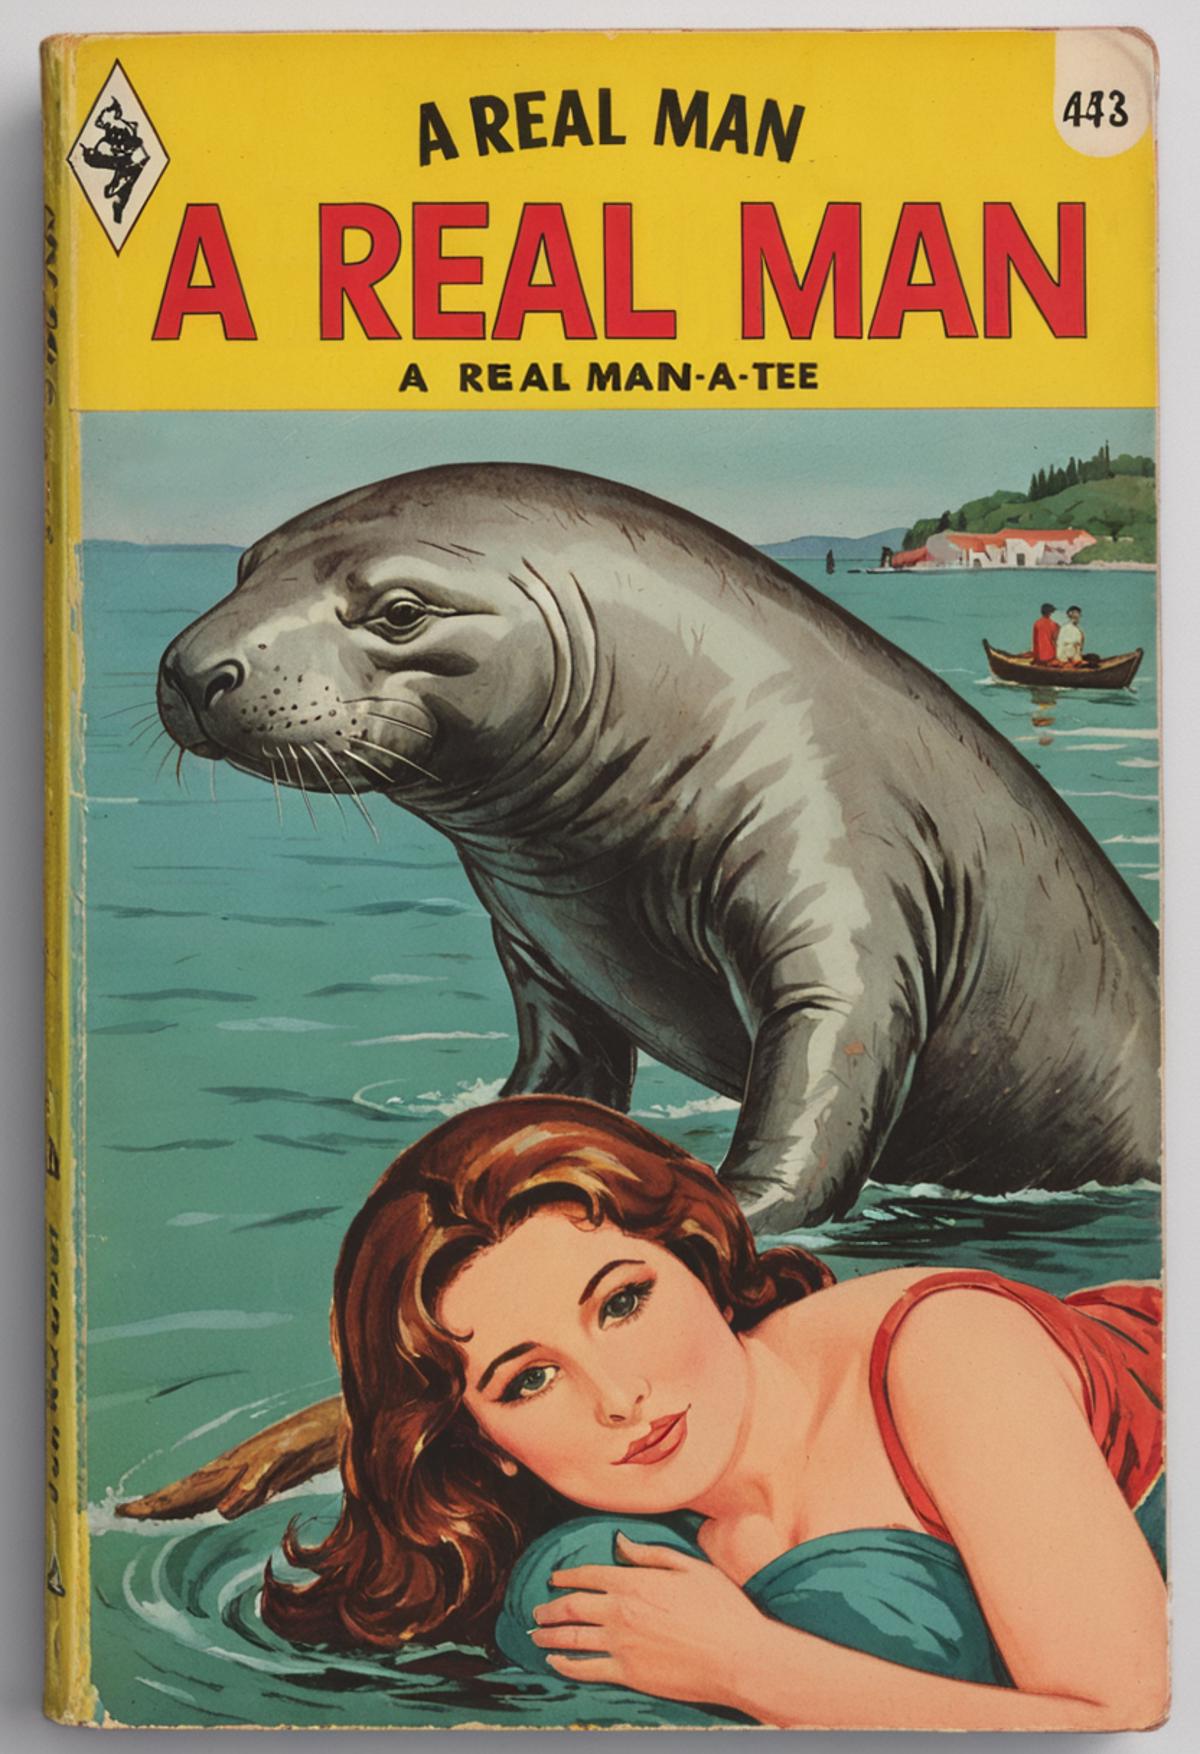 A Real Man-A-Tees Book Cover with a Woman and Manatee